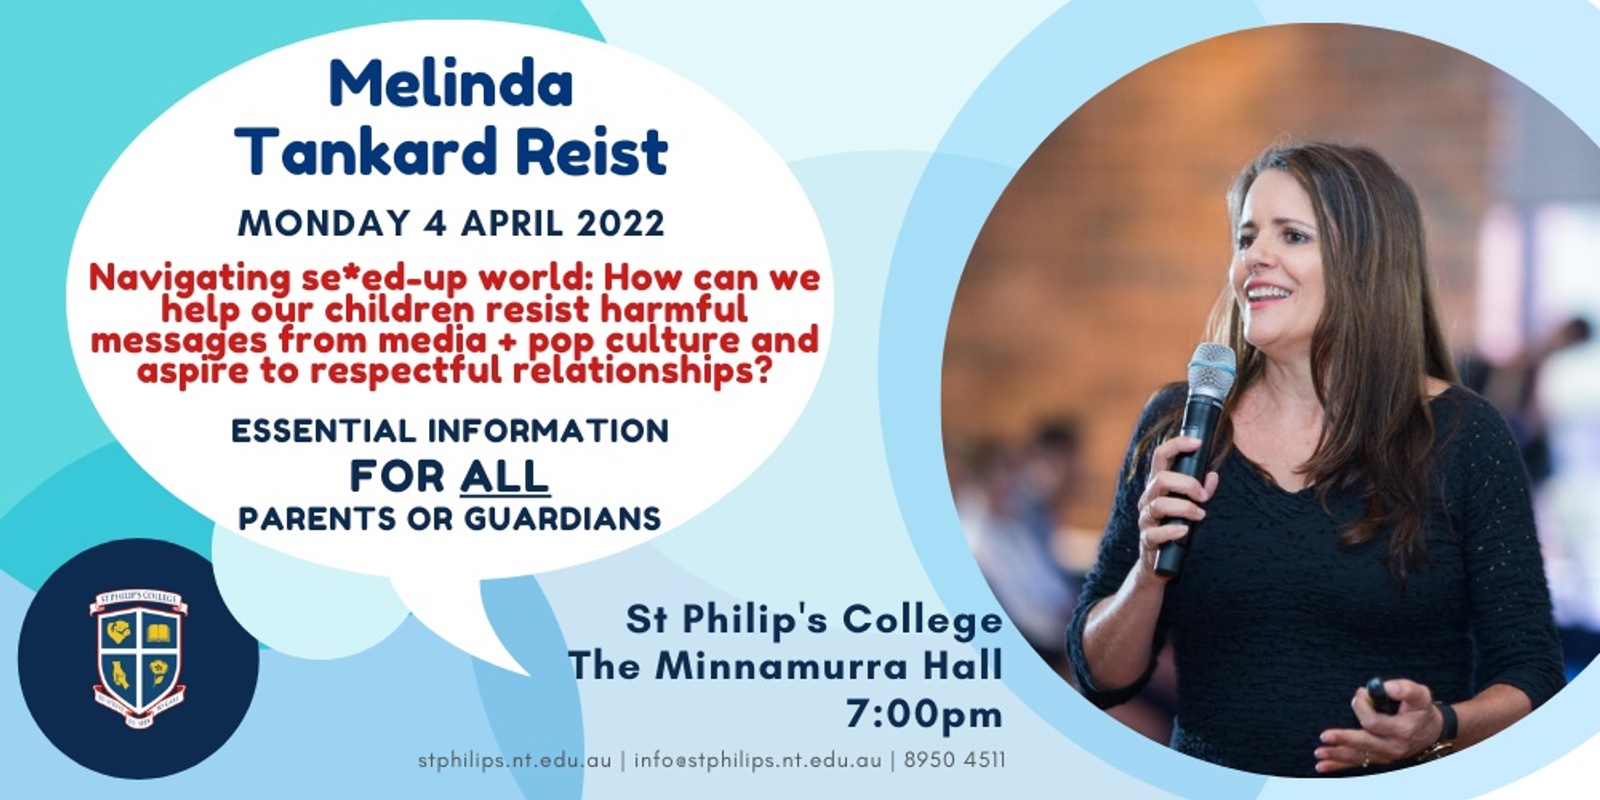 Banner image for POSTPONED due to ill health | Melinda Tankard Reist - Navigating a se*ed-up world: How can we help our children resist harmful messages from media + pop culture and aspire to respectful relationships? 